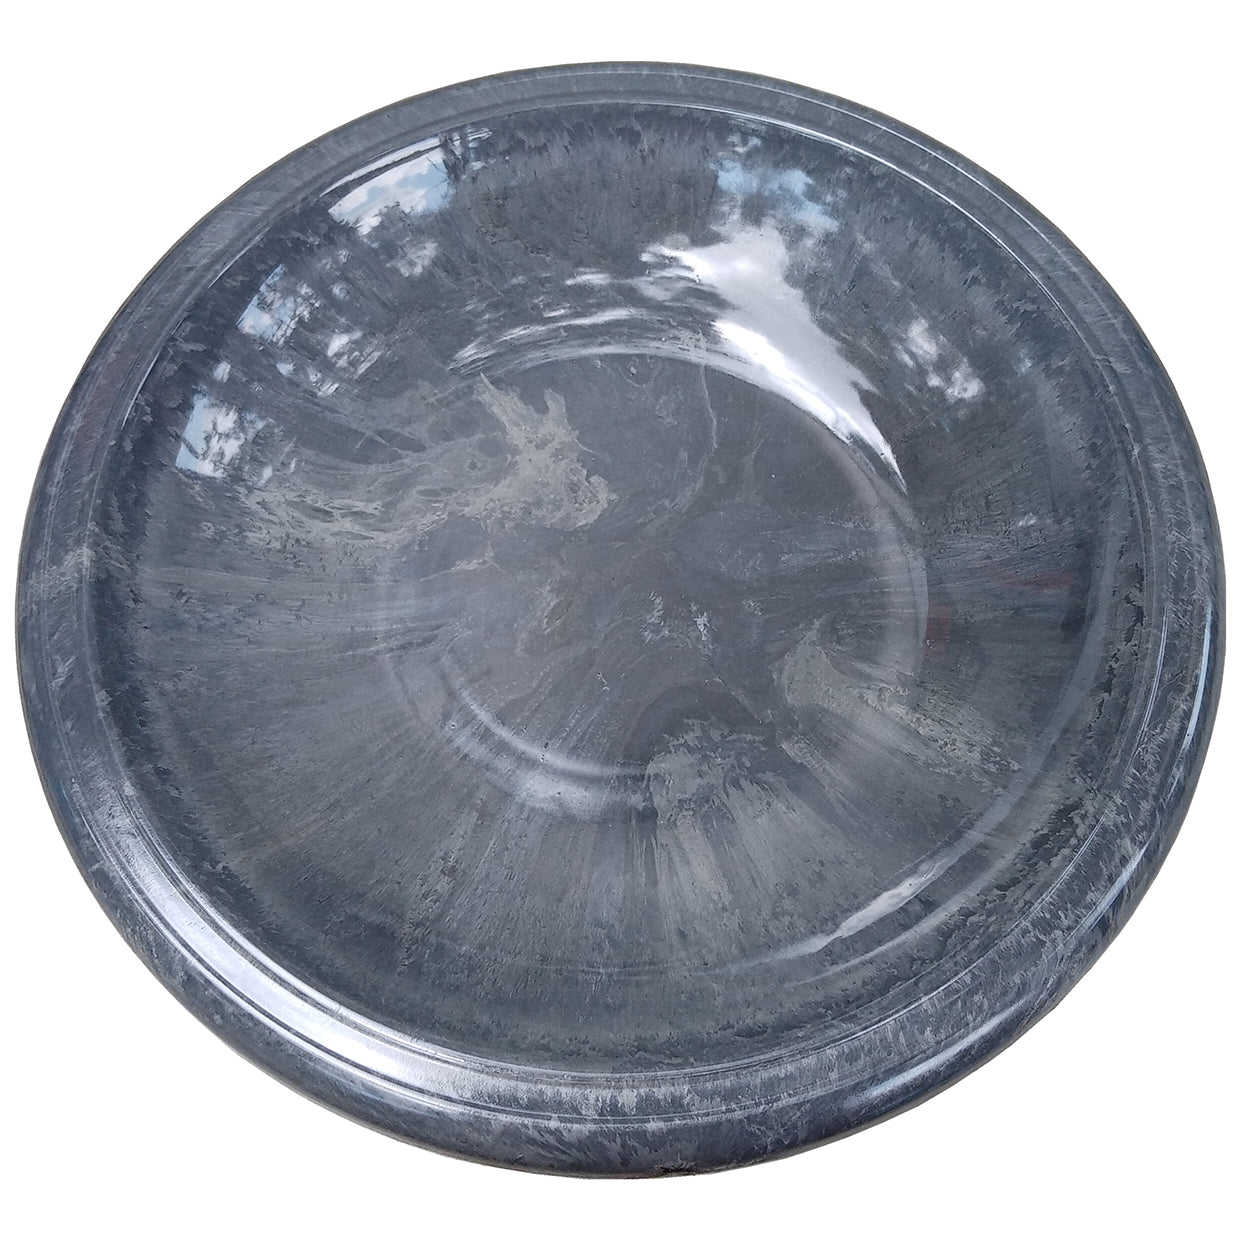 Dia Cool Gray Fiber Clay Birdbath Bowl. Made of clay, plastic, and fiber. Impact and shatter-resistant. UV protection. 19"D, 5 lbs.